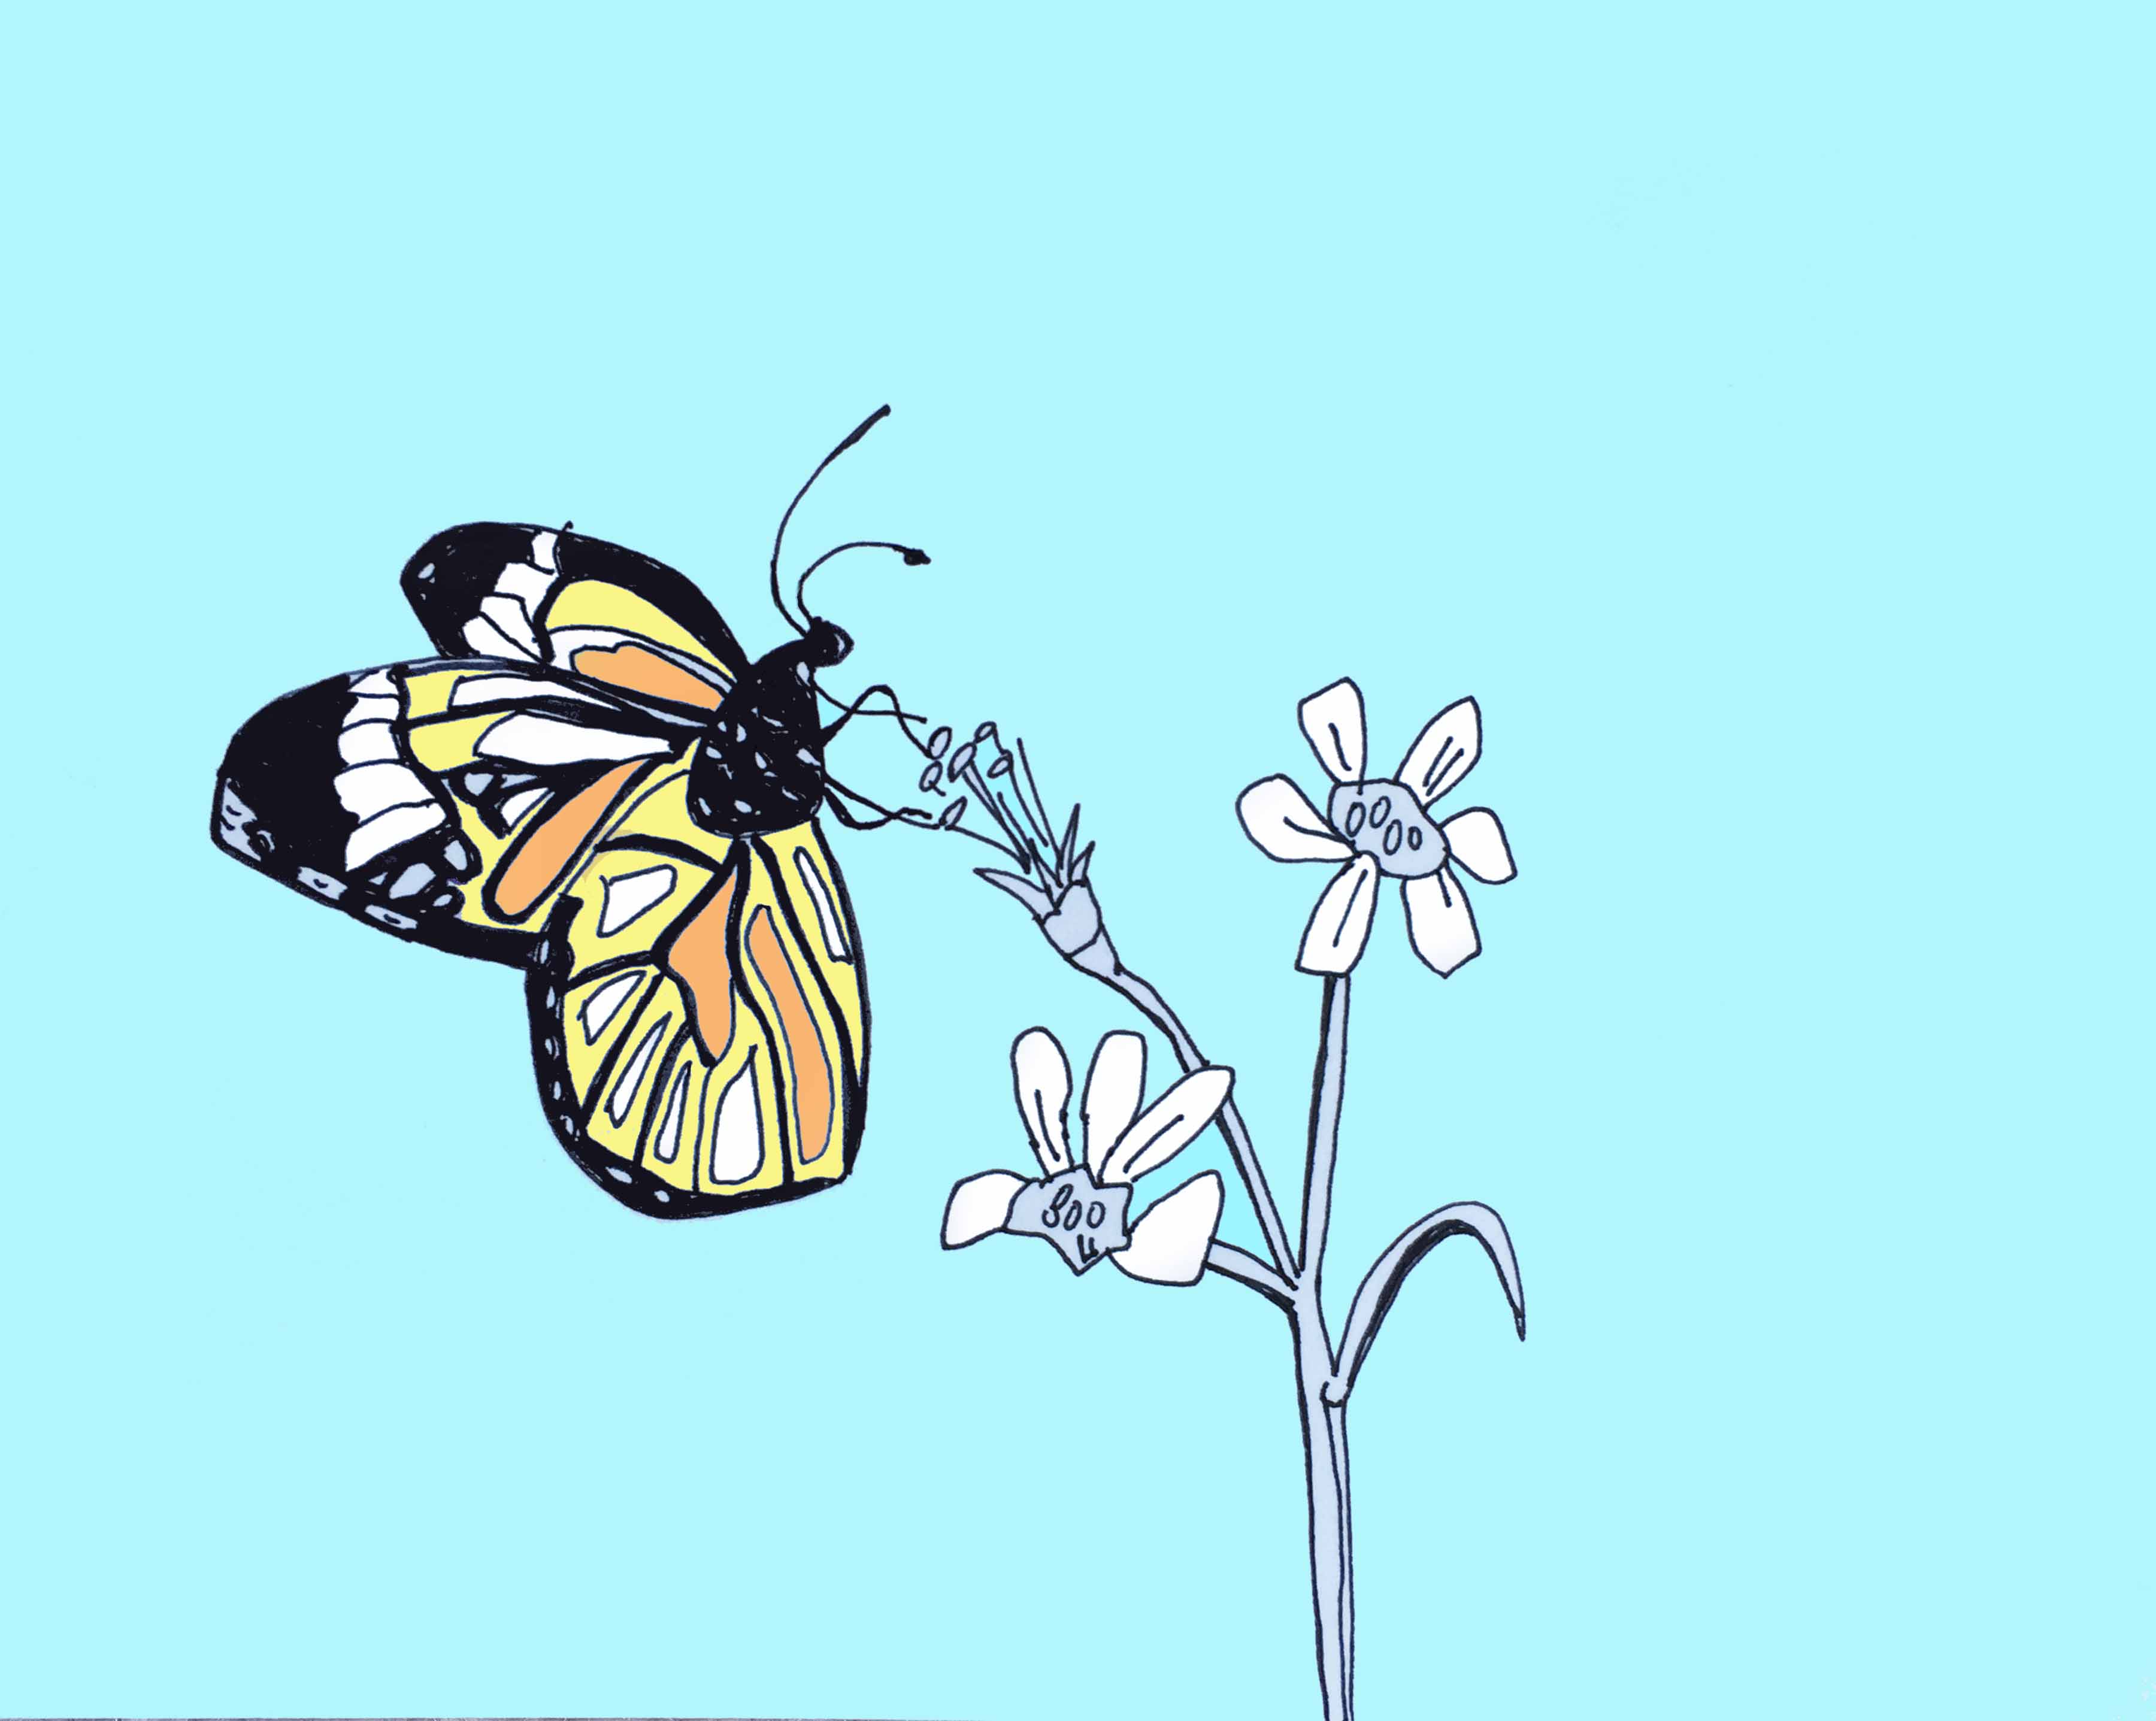 art every day number 141 / illustration / drawing / butterfly and flowers